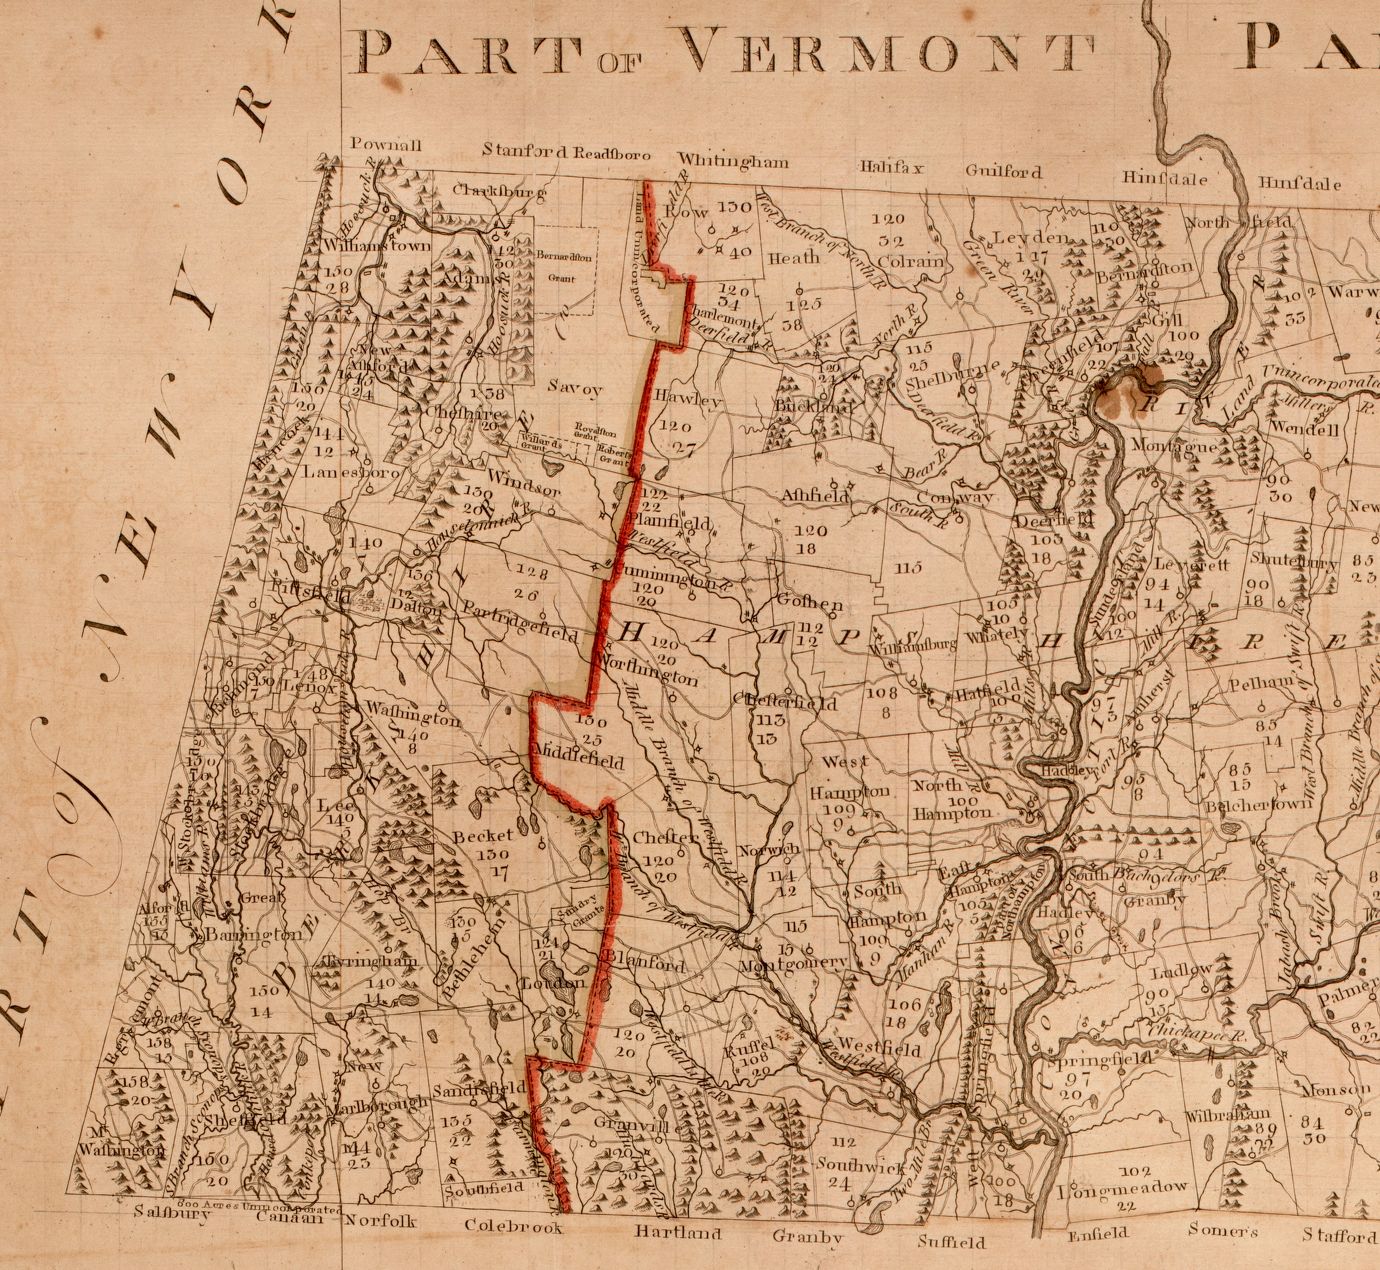 Details from Osgood Carelton's map of the commonwealth of Massachusetts, showing the lands which Dwight surveyed. This section focuses on western Massachusetts, specifically highlighting Berkshire and Hampshire counties. Otherwise balck and white, the two counties are separated by a red line.